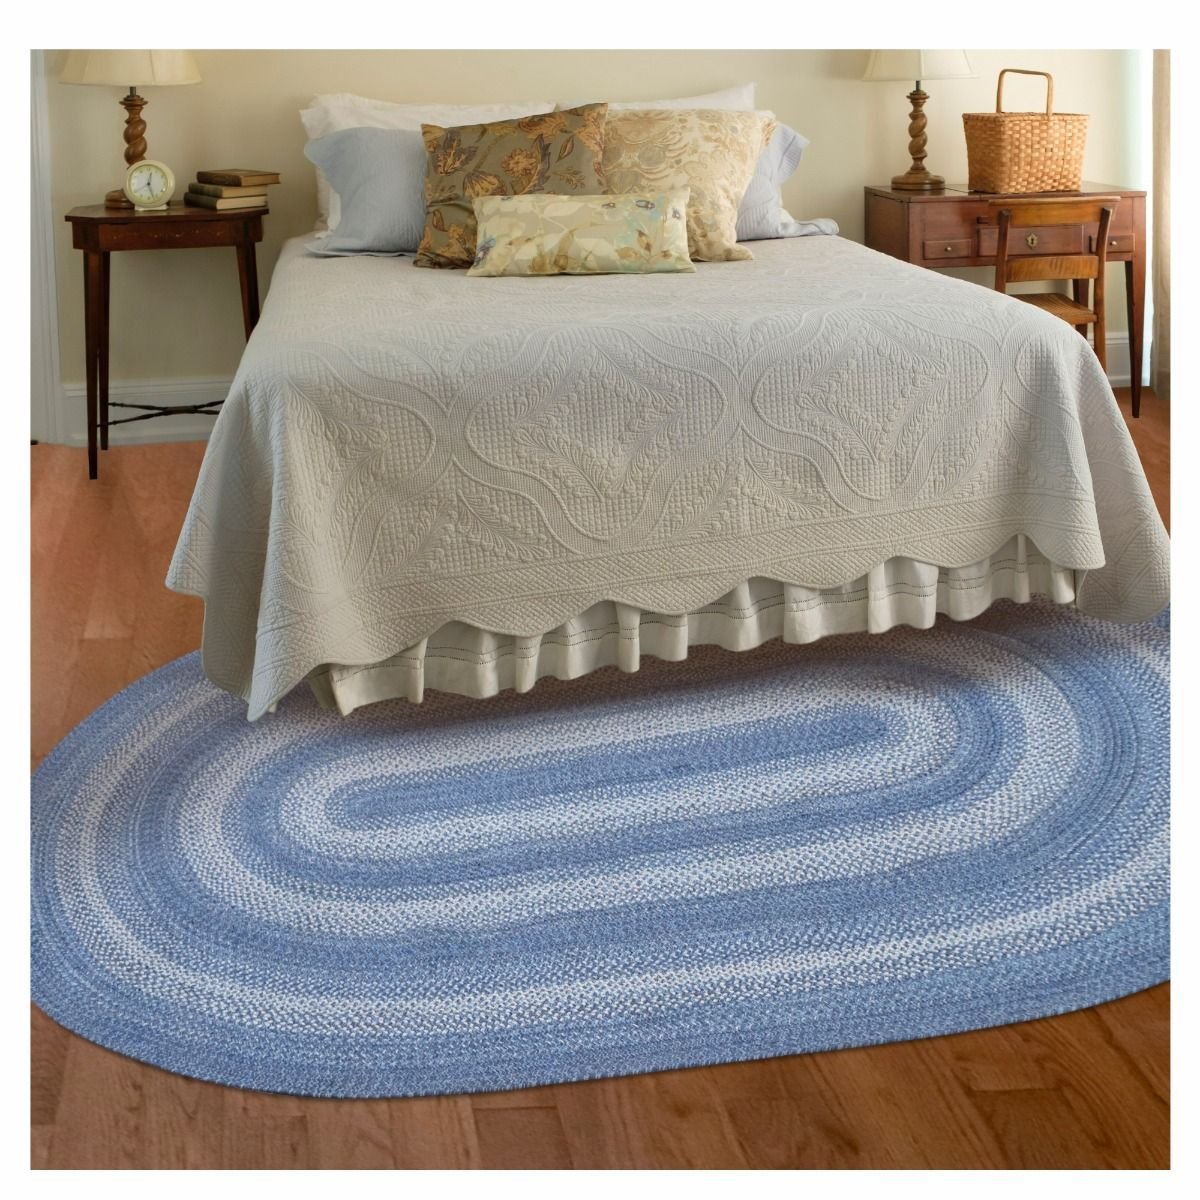 Homespice 20x30” Blue Oval Braided Rug. Denim Blue and White Jute Oval Rug.  Uses- Entryway Rugs, Kitchen Rugs, Bathroom Rugs. Reversible, Rustic